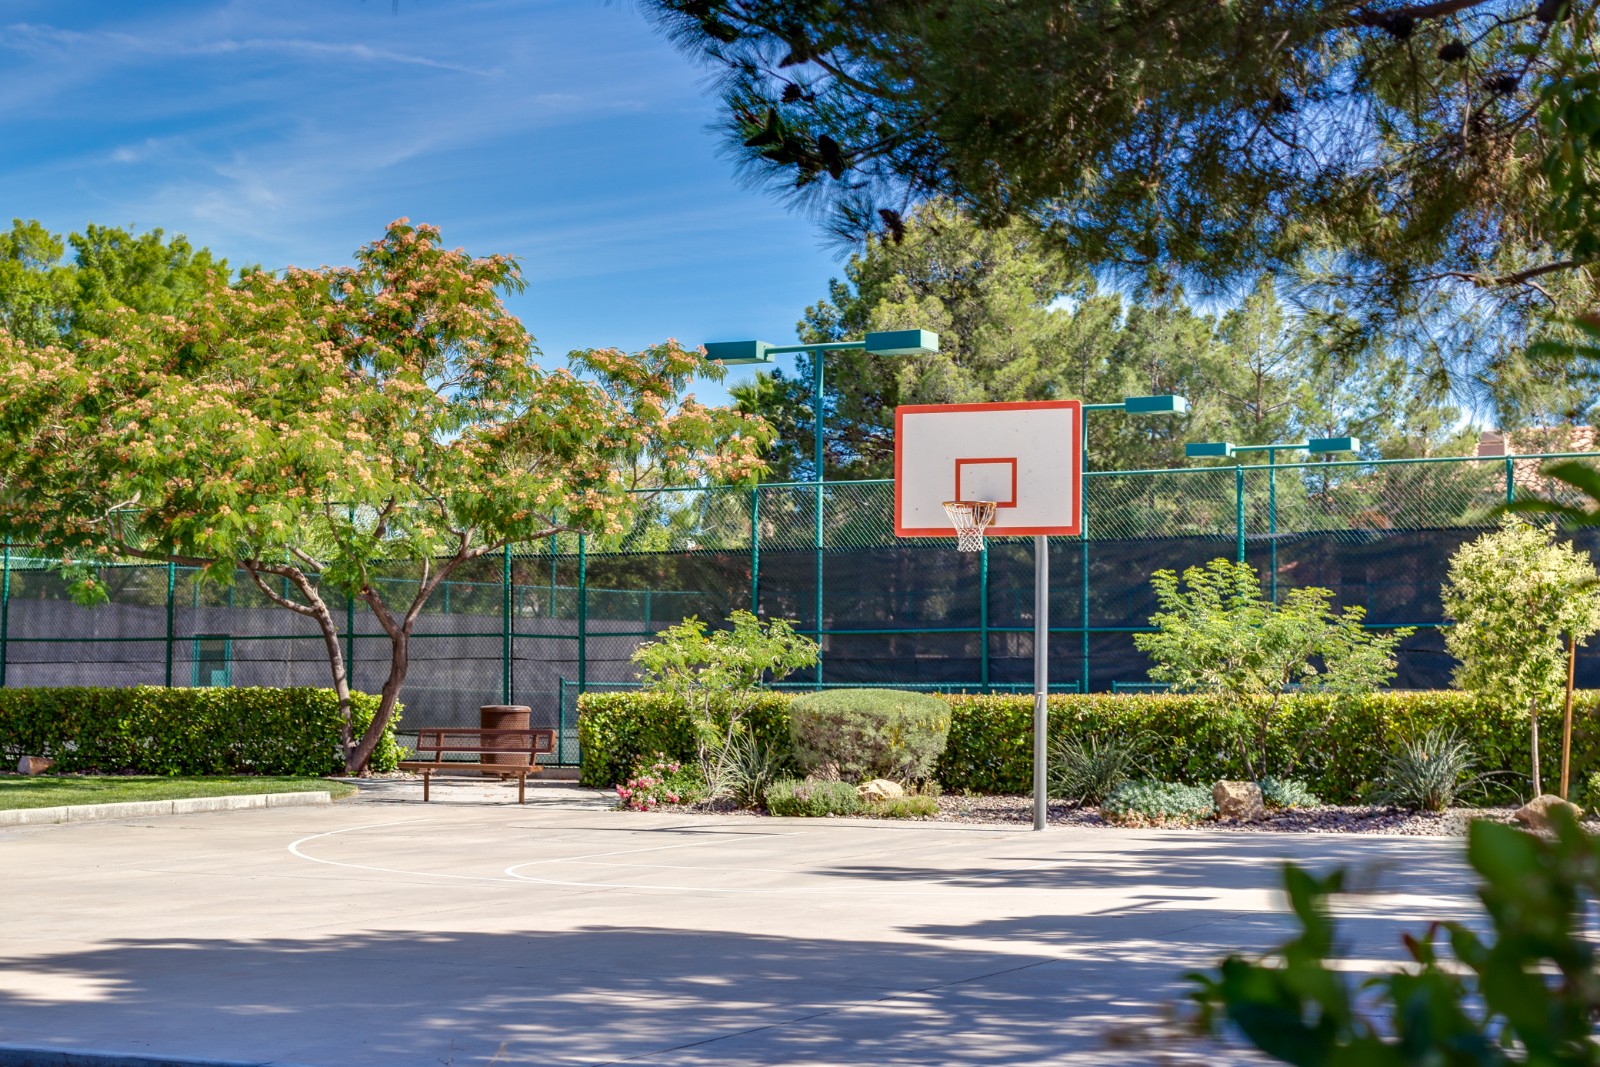 The Fountains community basketball and tennis court